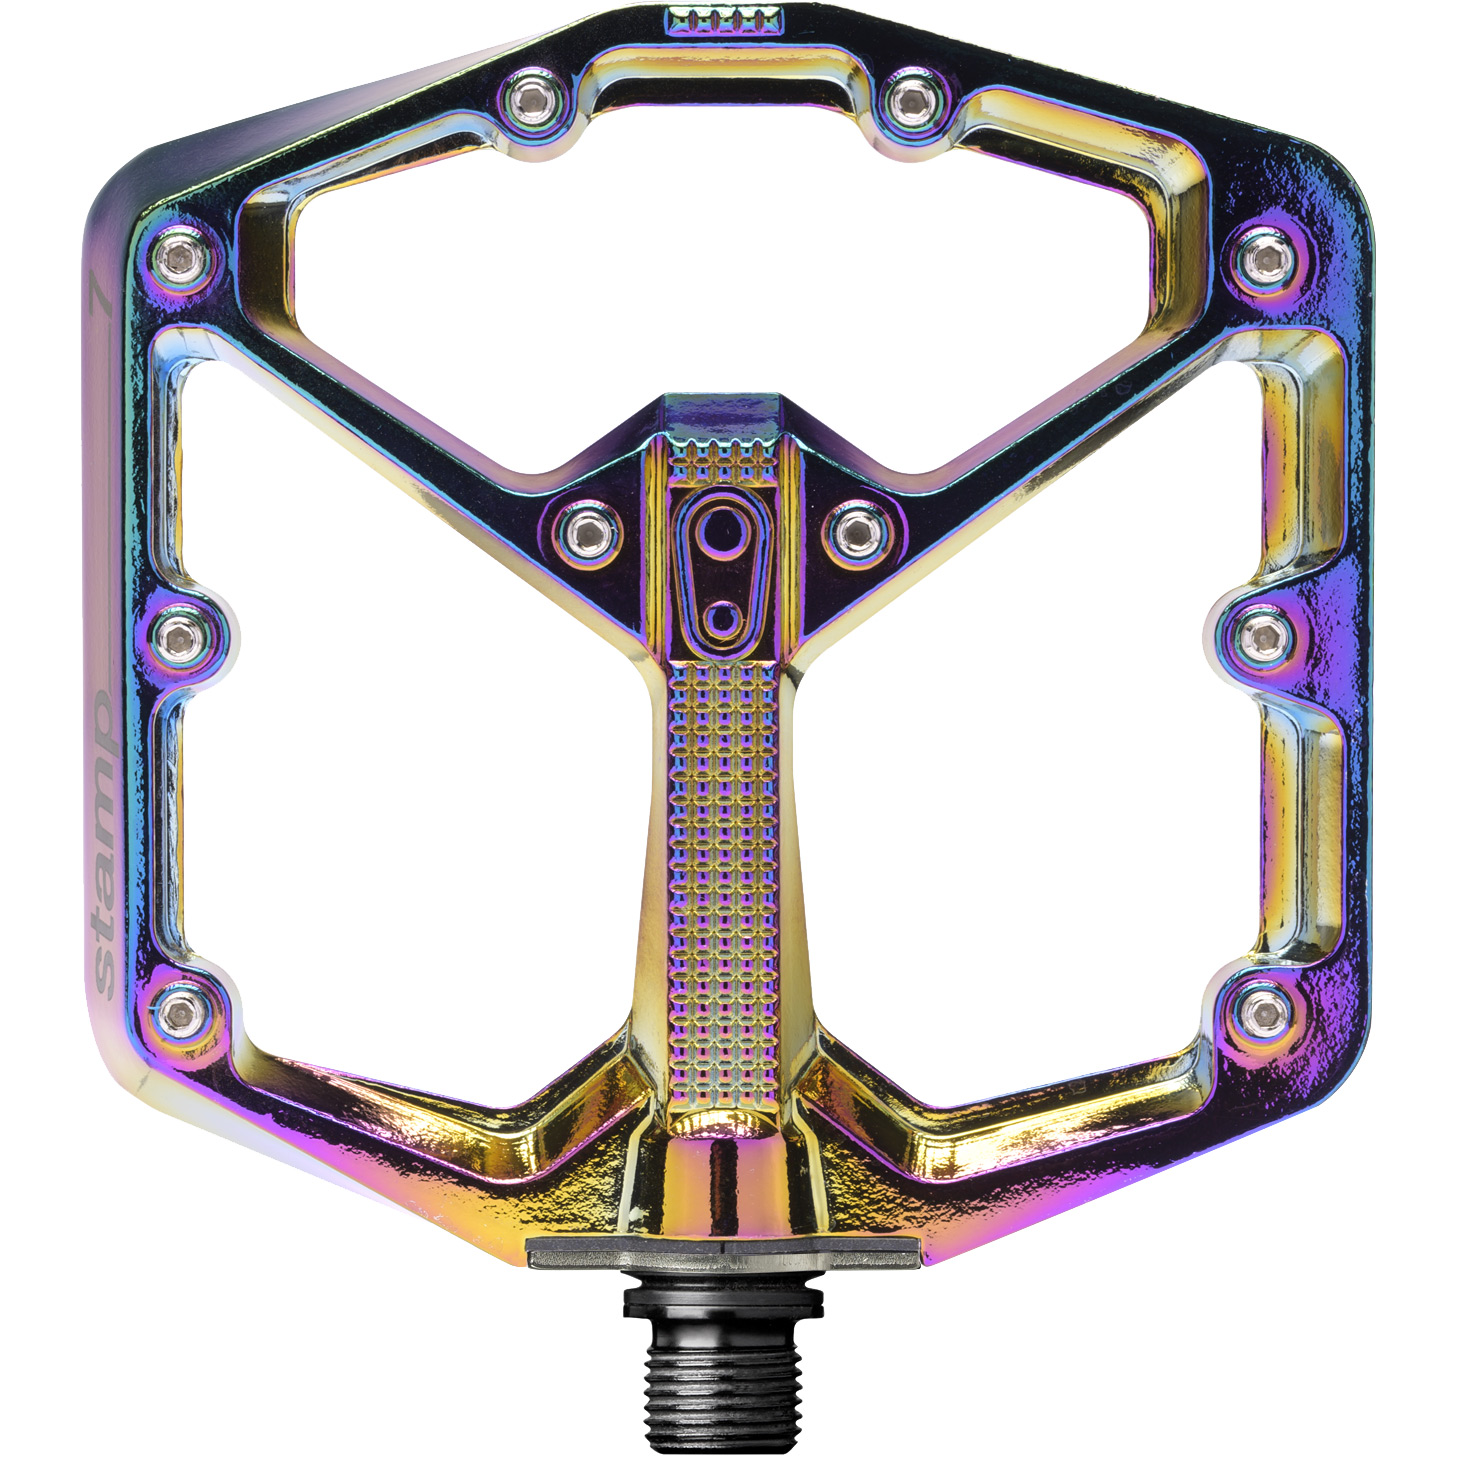 Picture of Crankbrothers Stamp 7 Large Flat Pedals - Limited Edition - oil slick